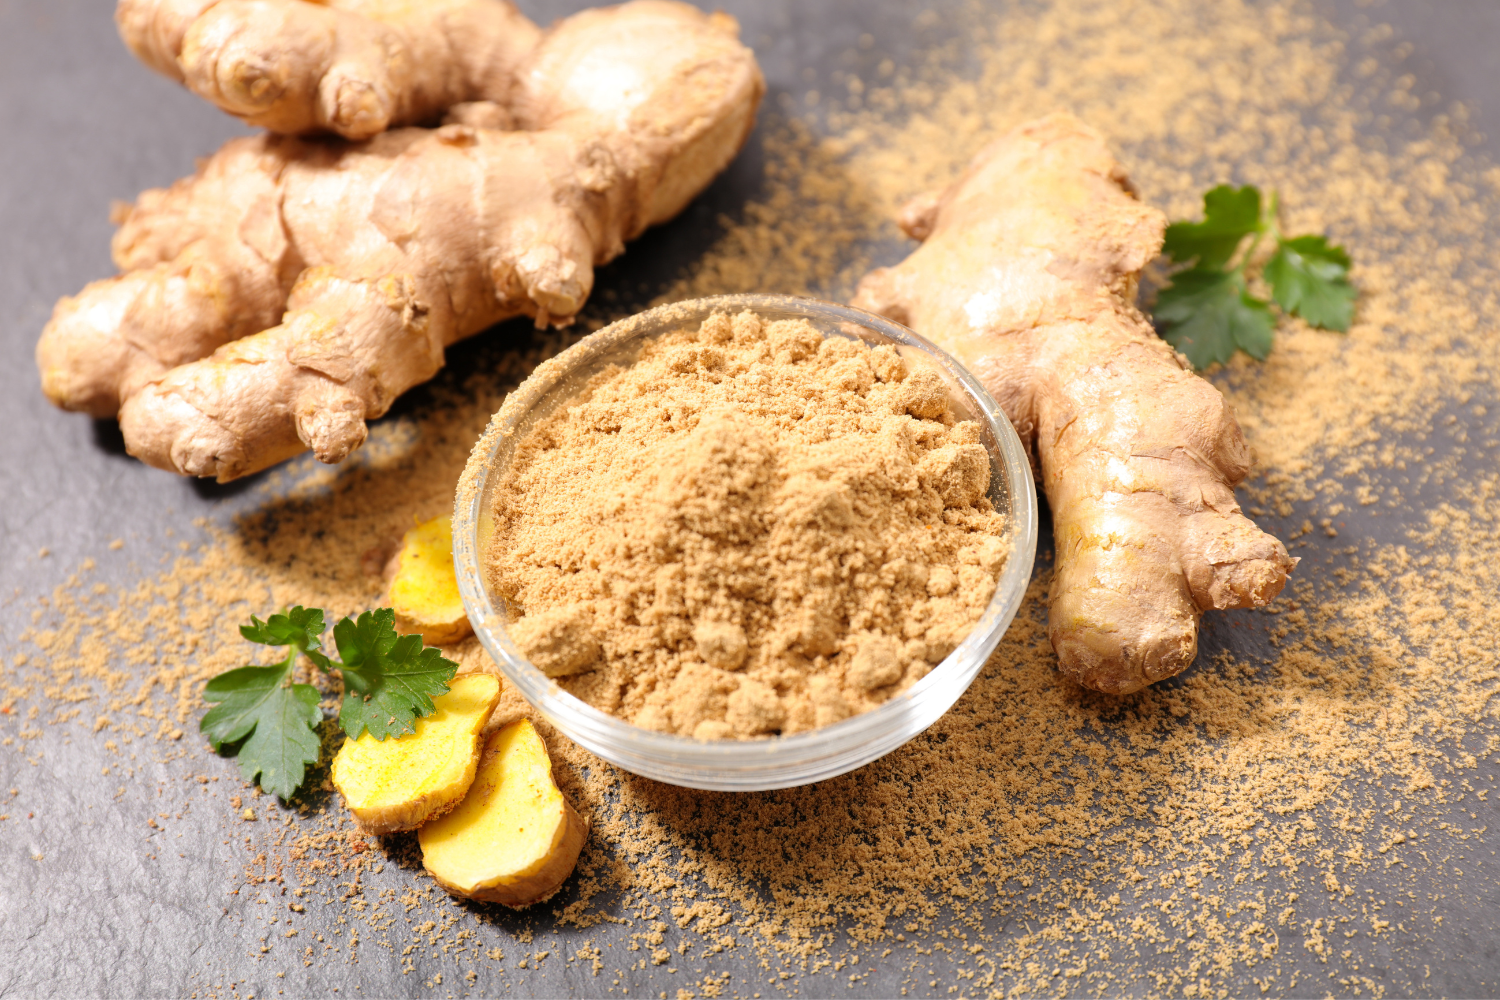 Ginger: A Natural Remedy for Migraines